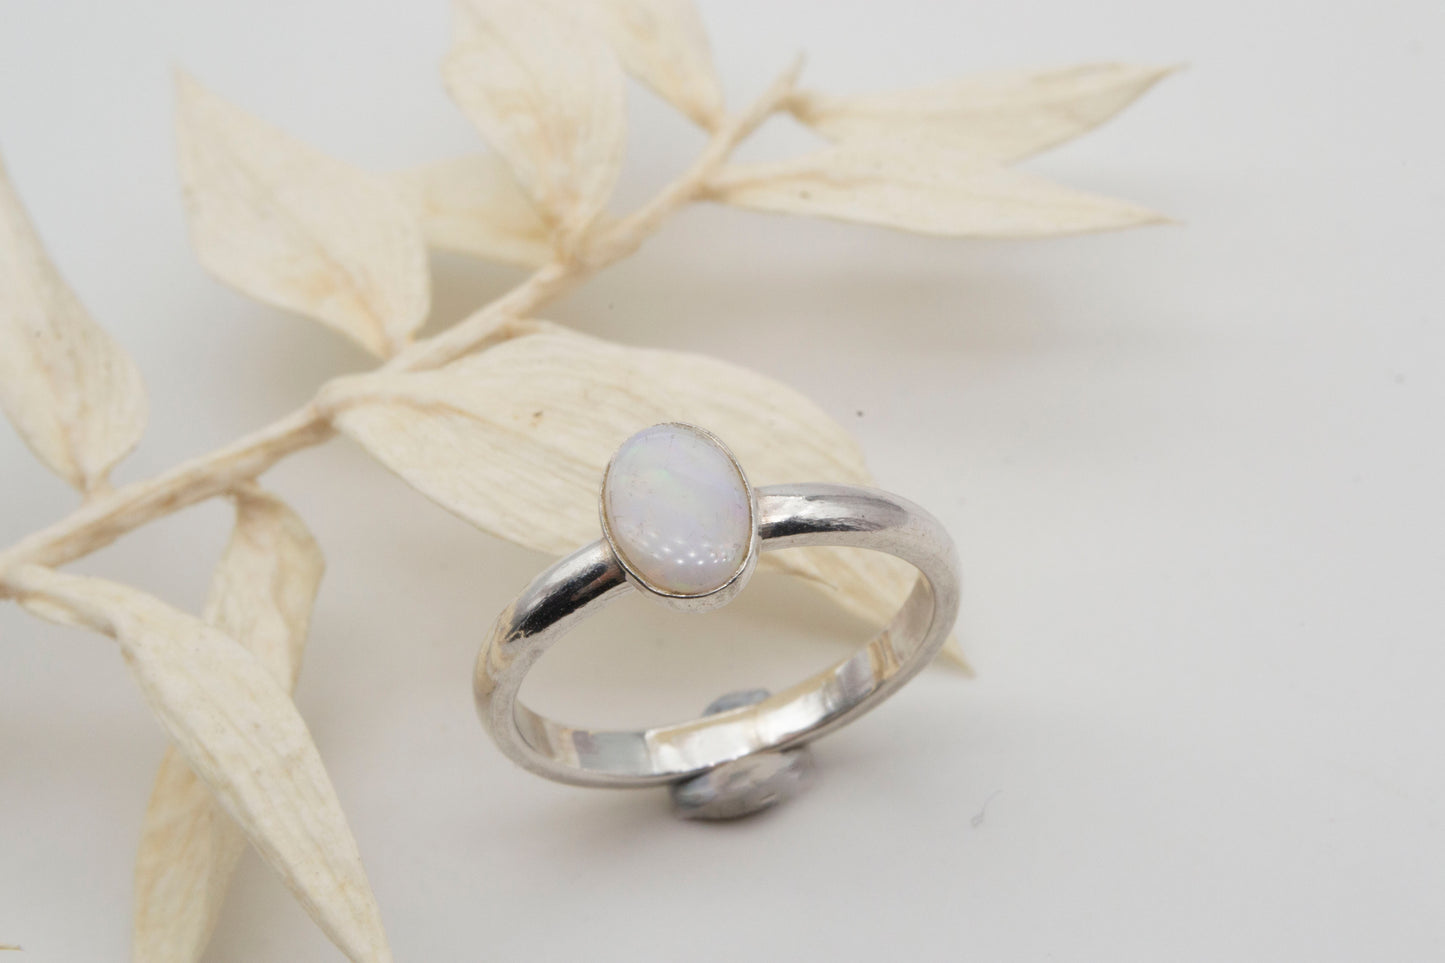 Natural opal oval cabochon ring Size J1/2